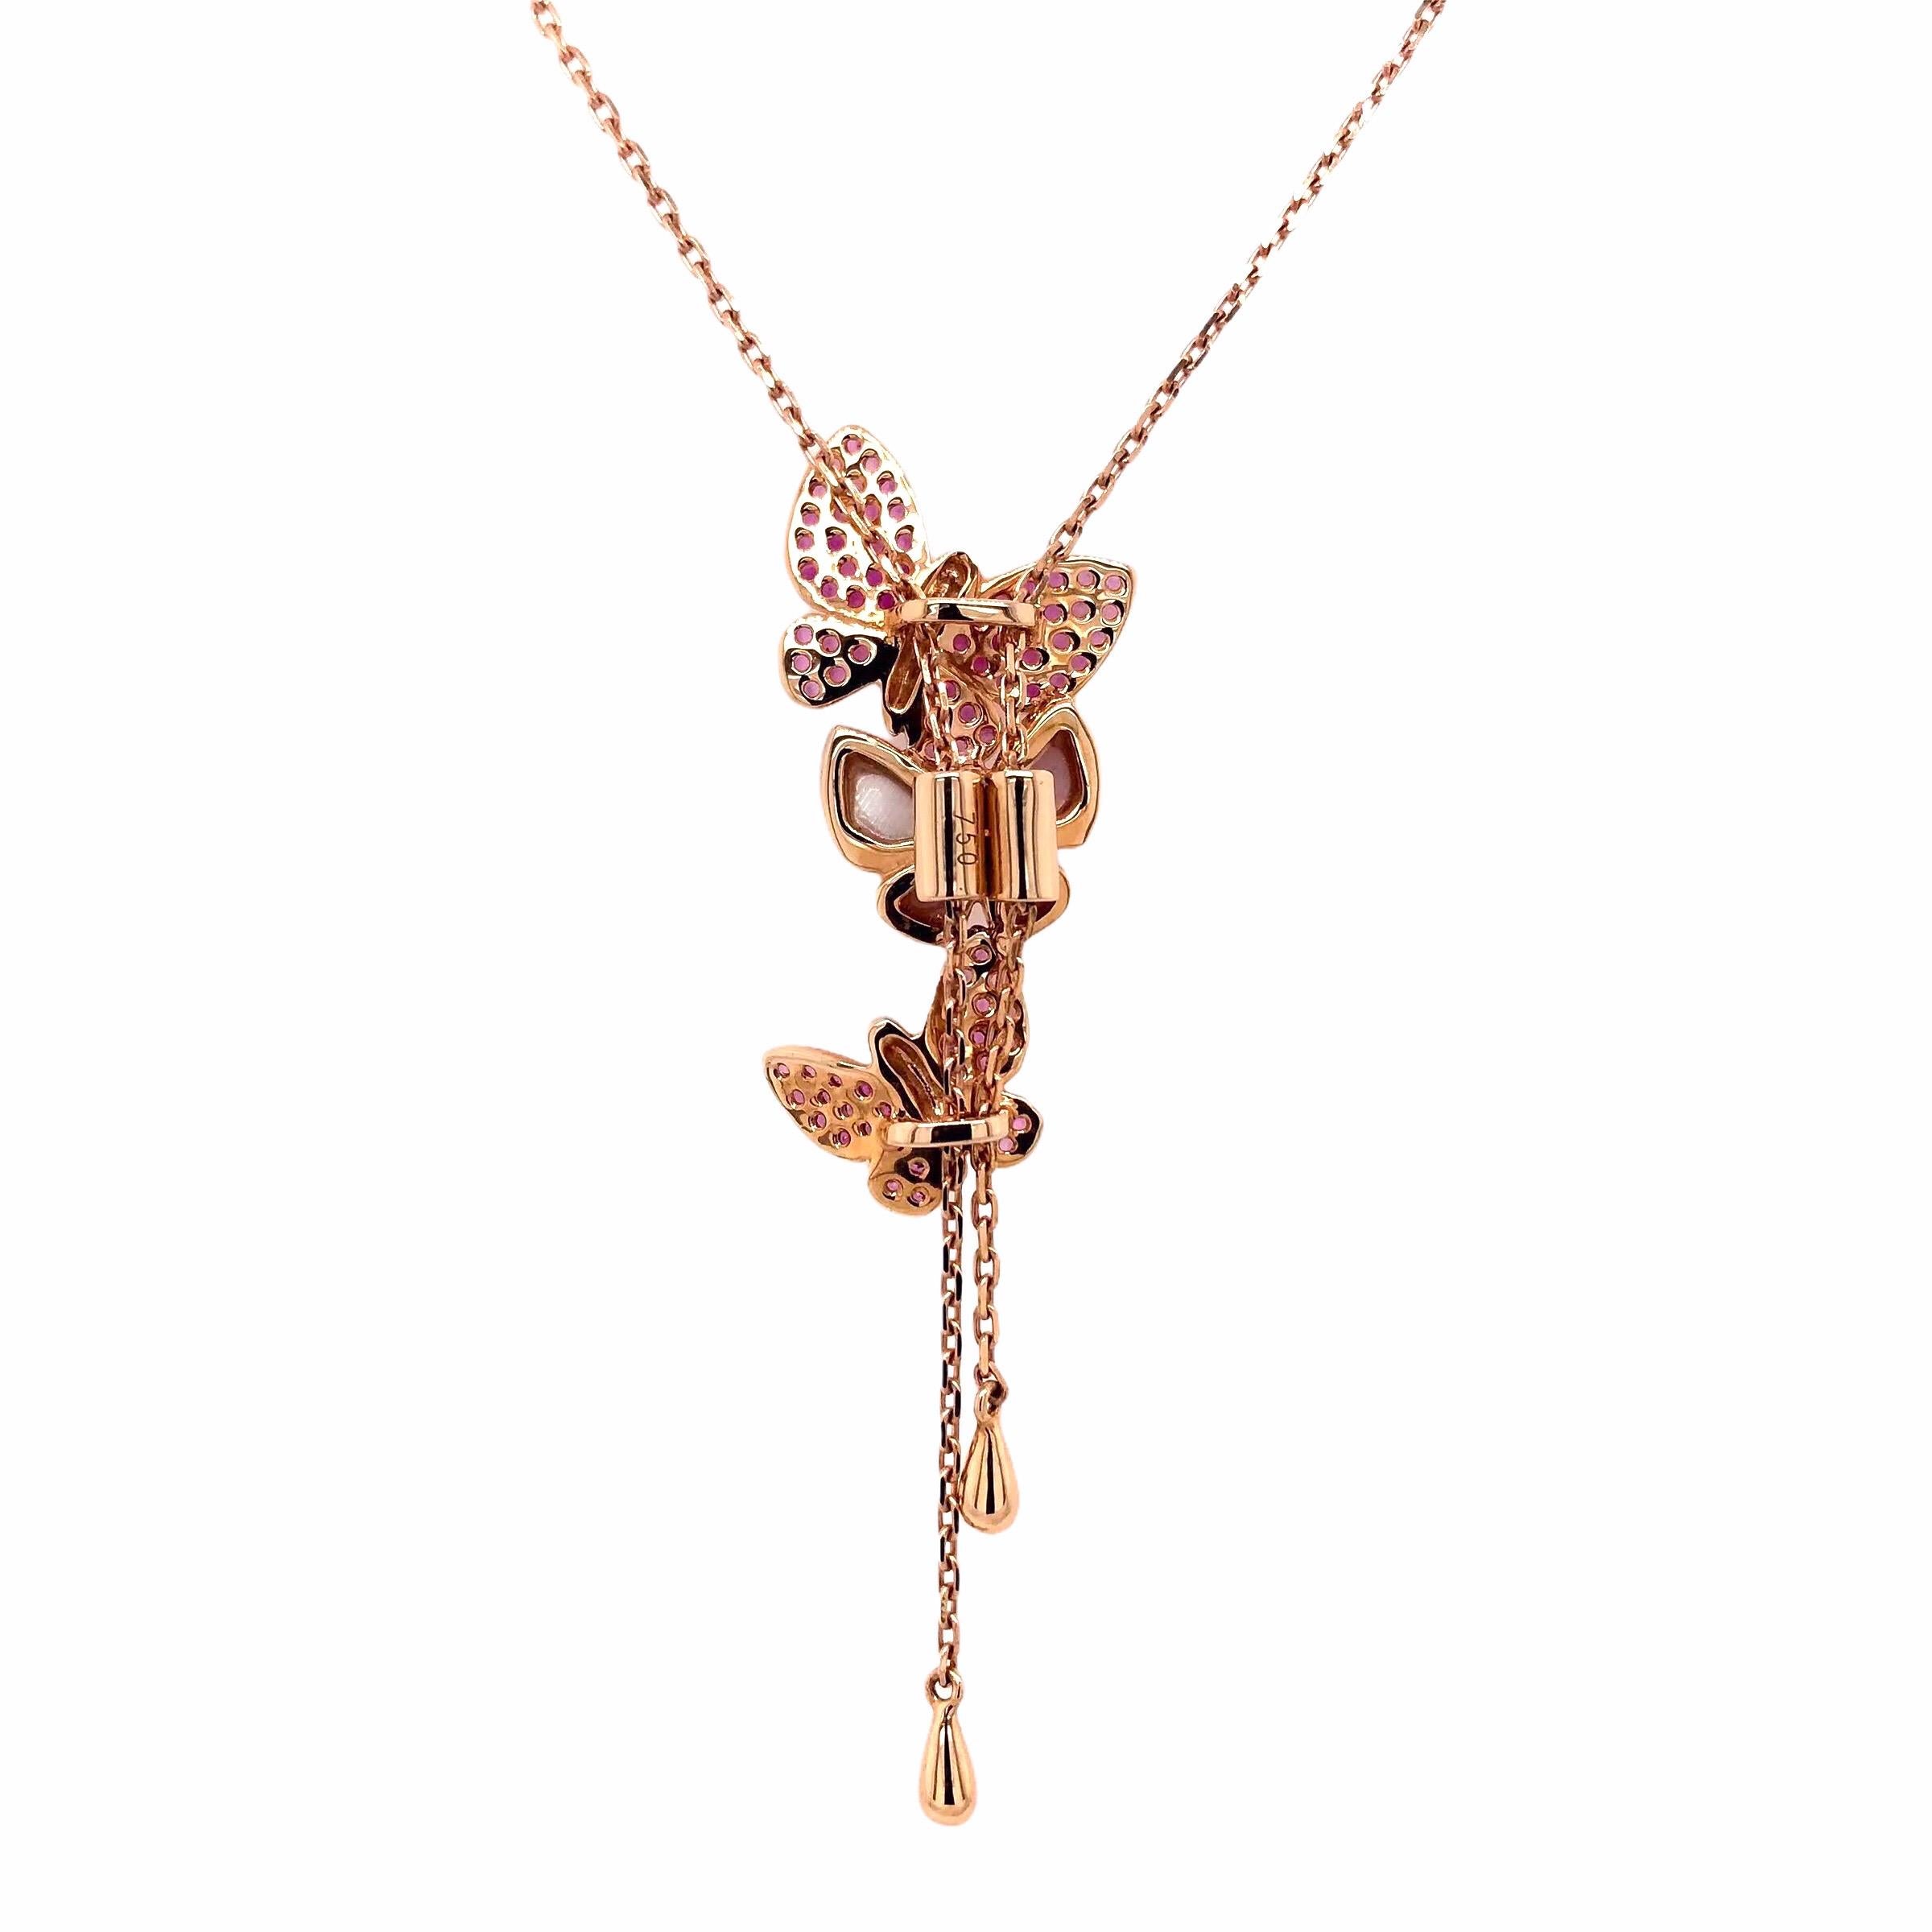 PARIS Craft House Pink Sapphire Mother of Pearl Necklace in 18 Karat Rose Gold.

- 81 Round Pink Sapphires/0.61ct
- 8 Round Diamonds/0.01ct
- 18K Rose Gold/8.76g

Designed and crafted at PARIS Craft House.